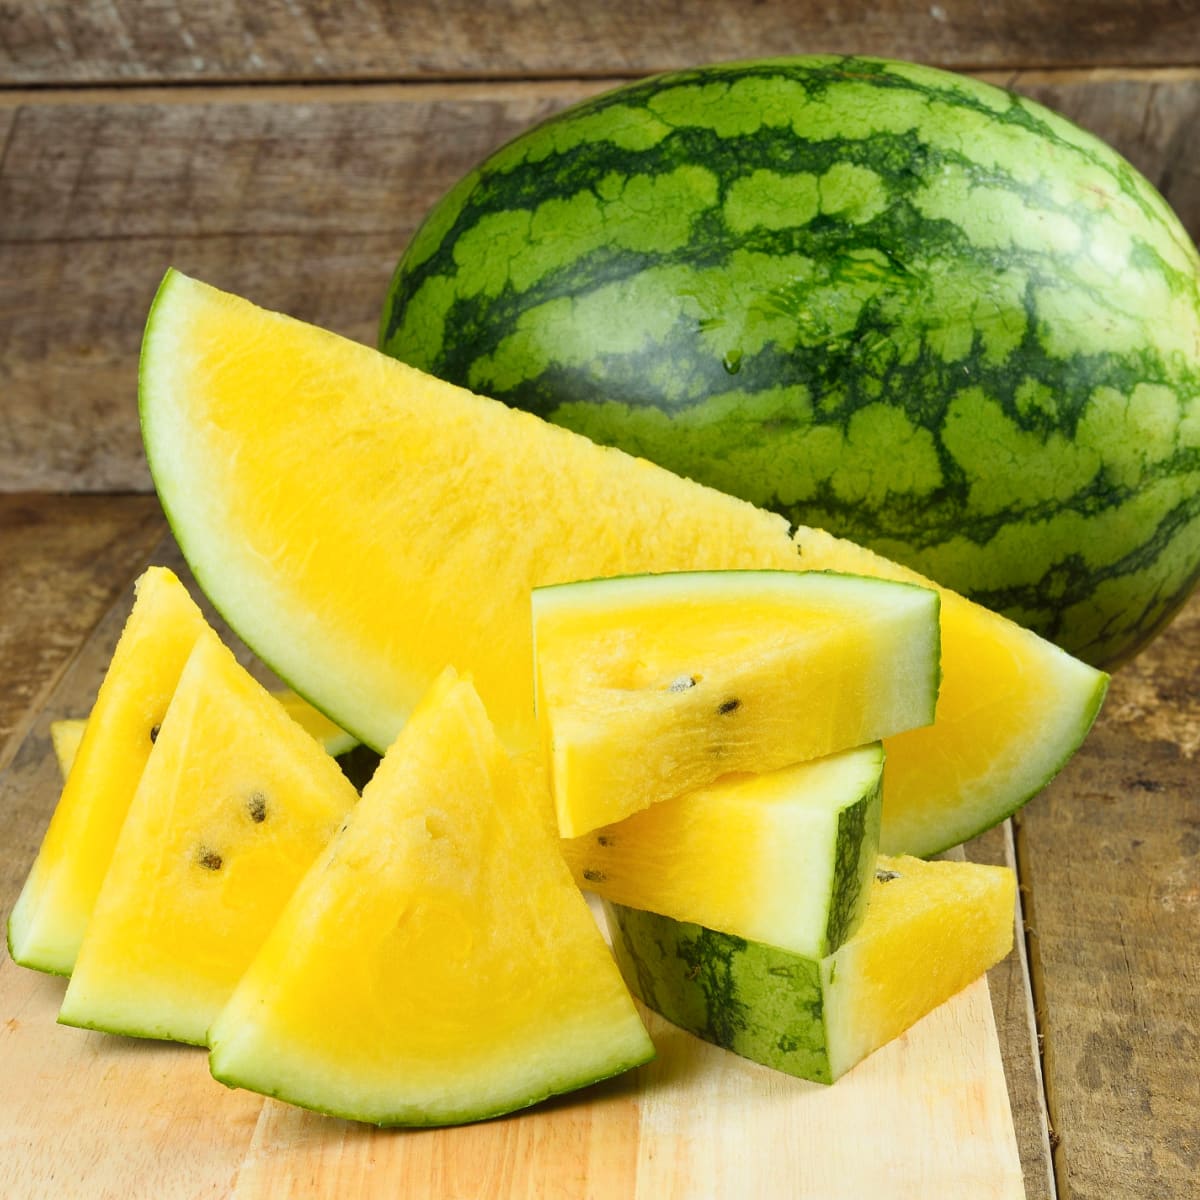 Whole and Sliced Yellow Watermelon on a Cutting Board on Top of Wooden Table